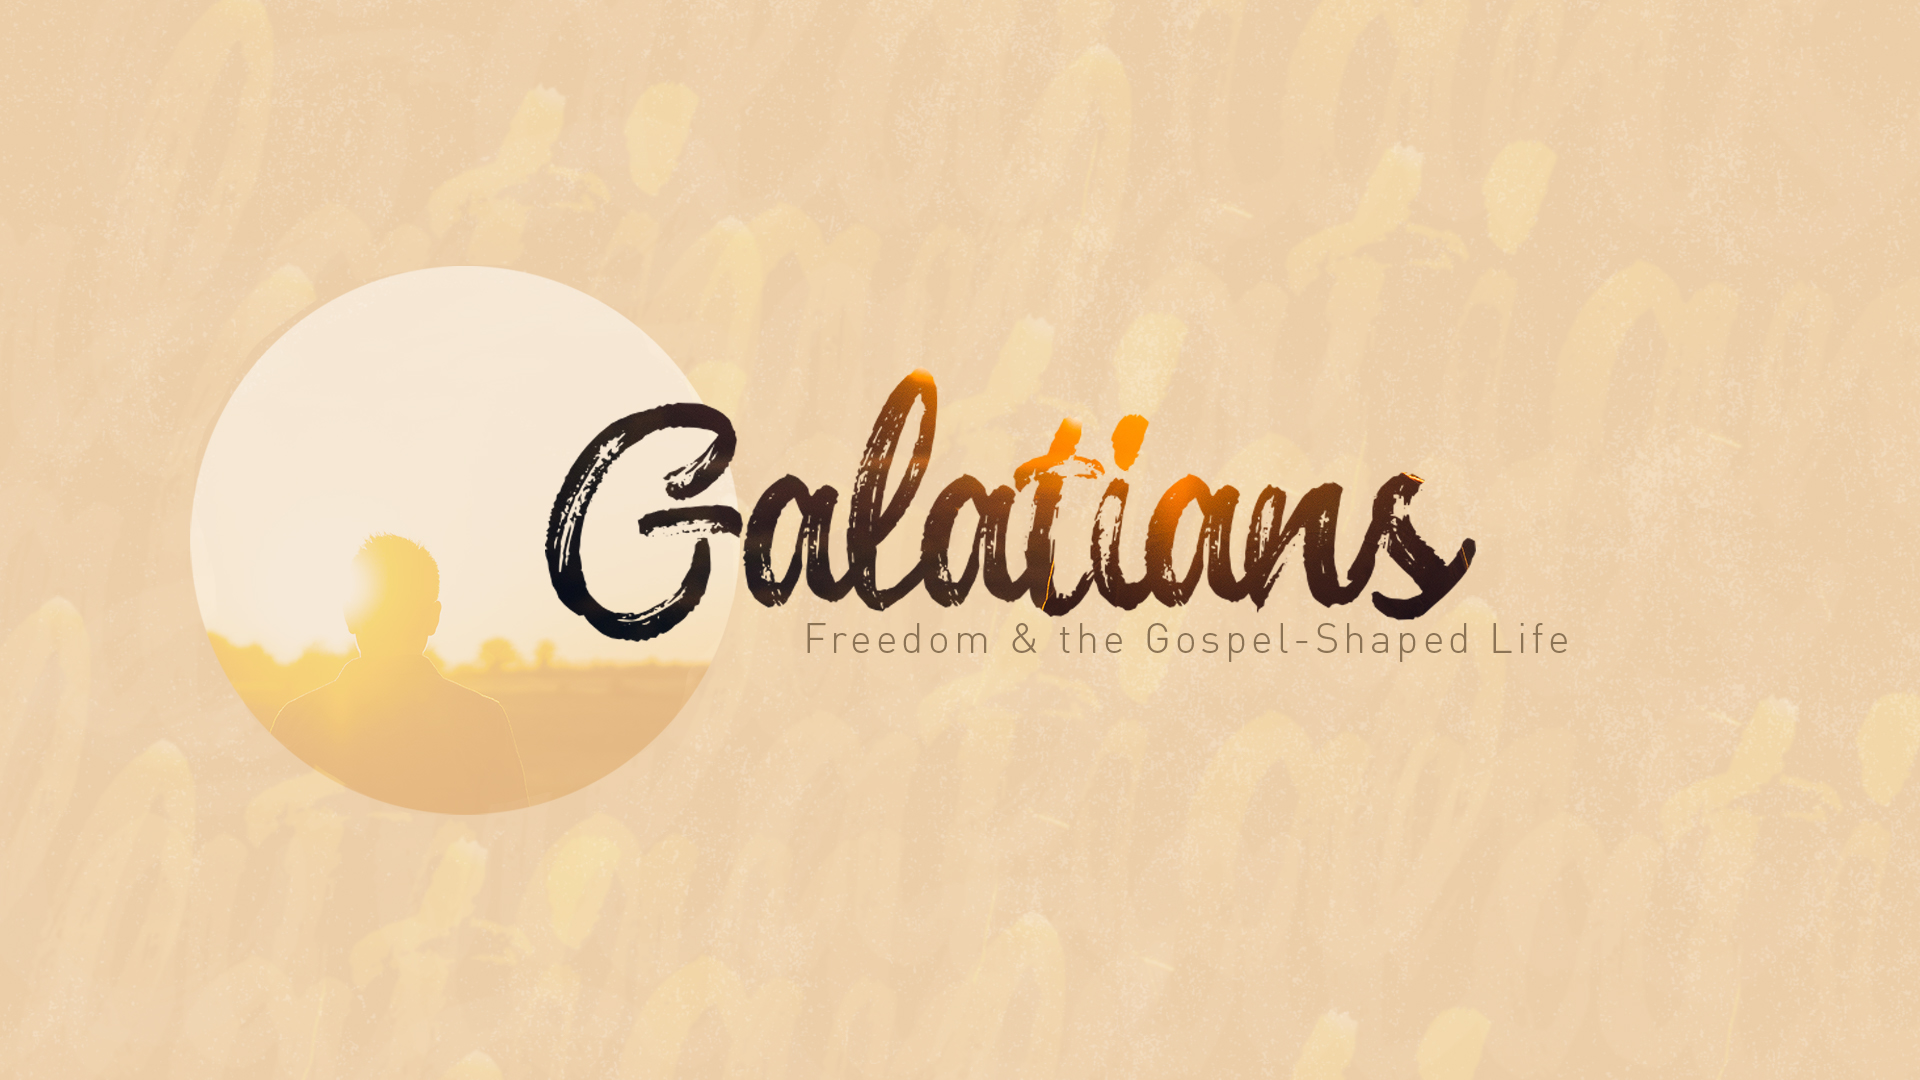 Galatians: Freedom and the Gospel-Shaped Life